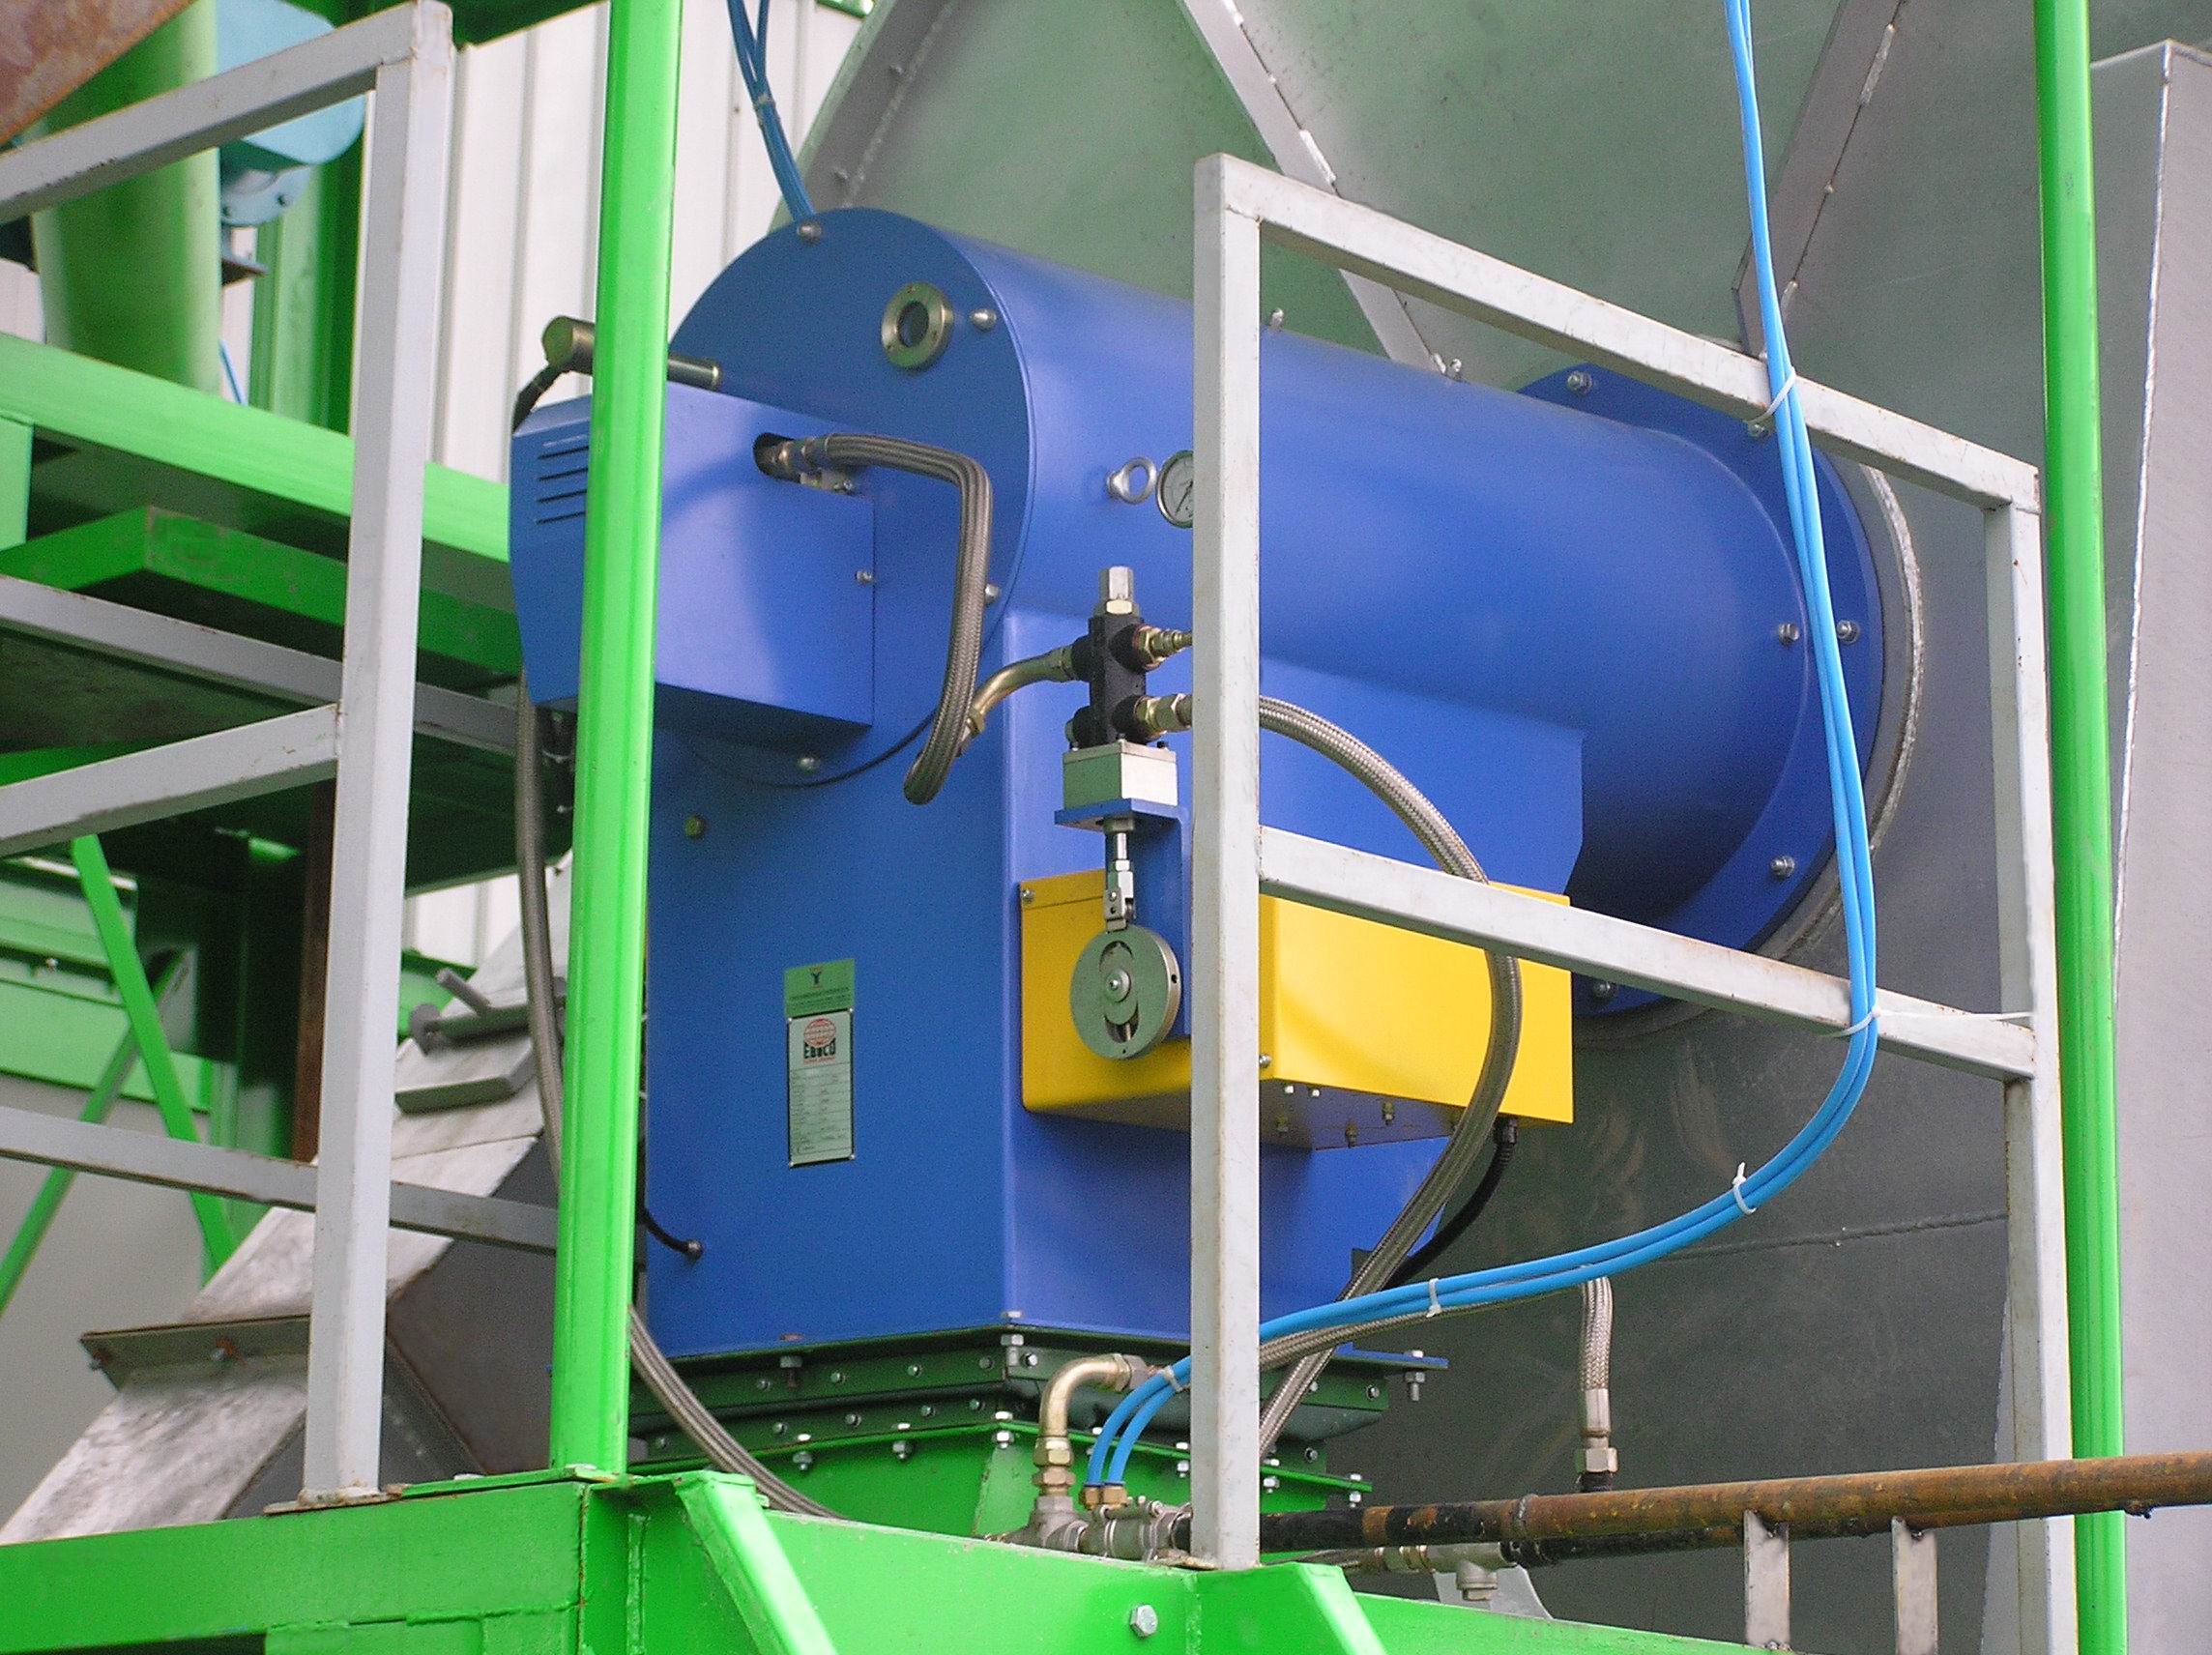 Briefly Describe How to Judge the Working Condition of Burning System of Asphalt Mixing Plant

